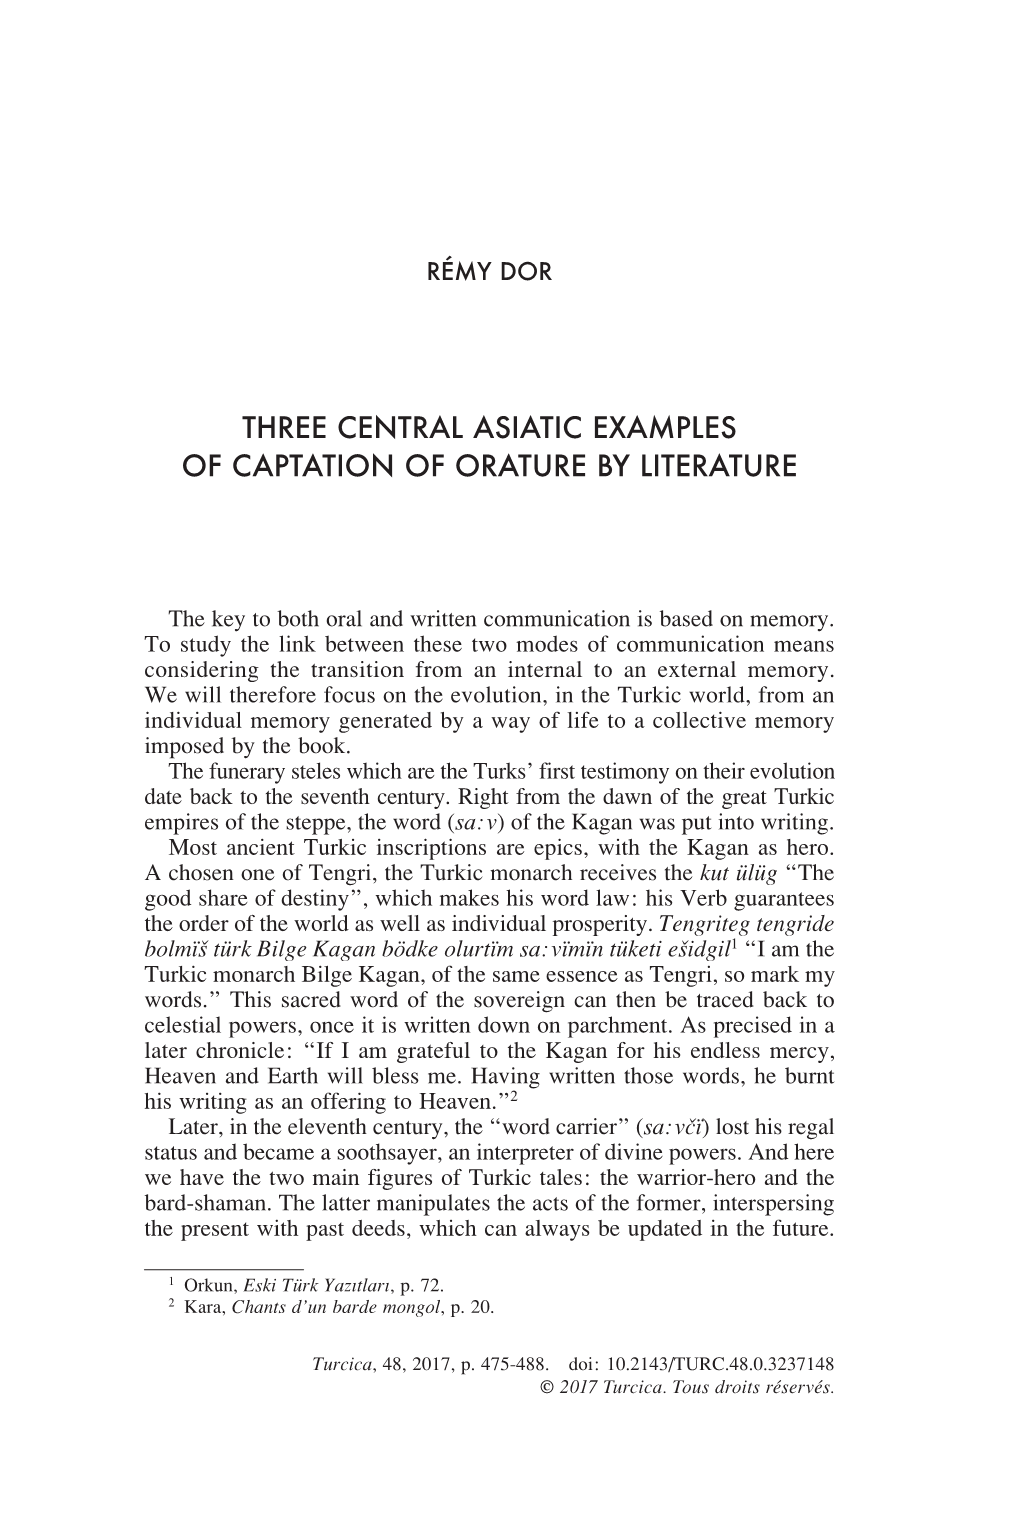 Three Central Asiatic Examples of Captation of Orature by Literature